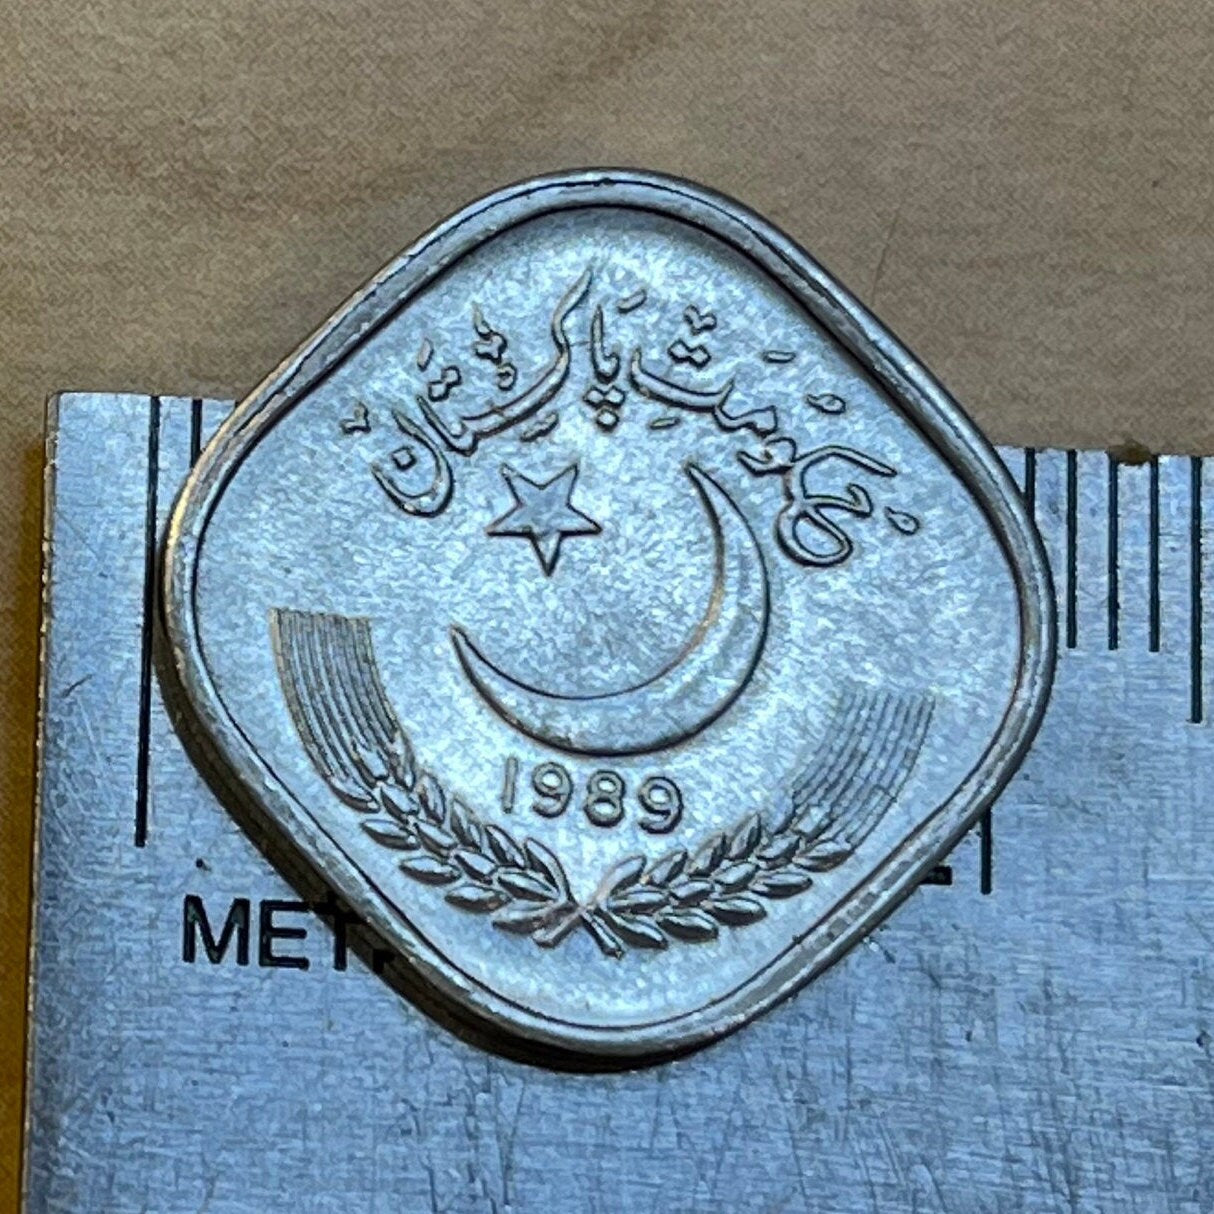 Star and Crescent 5 Paisa Pakistan Authentic Coin Money for Jewelry and Craft Making (Sugar Cane)